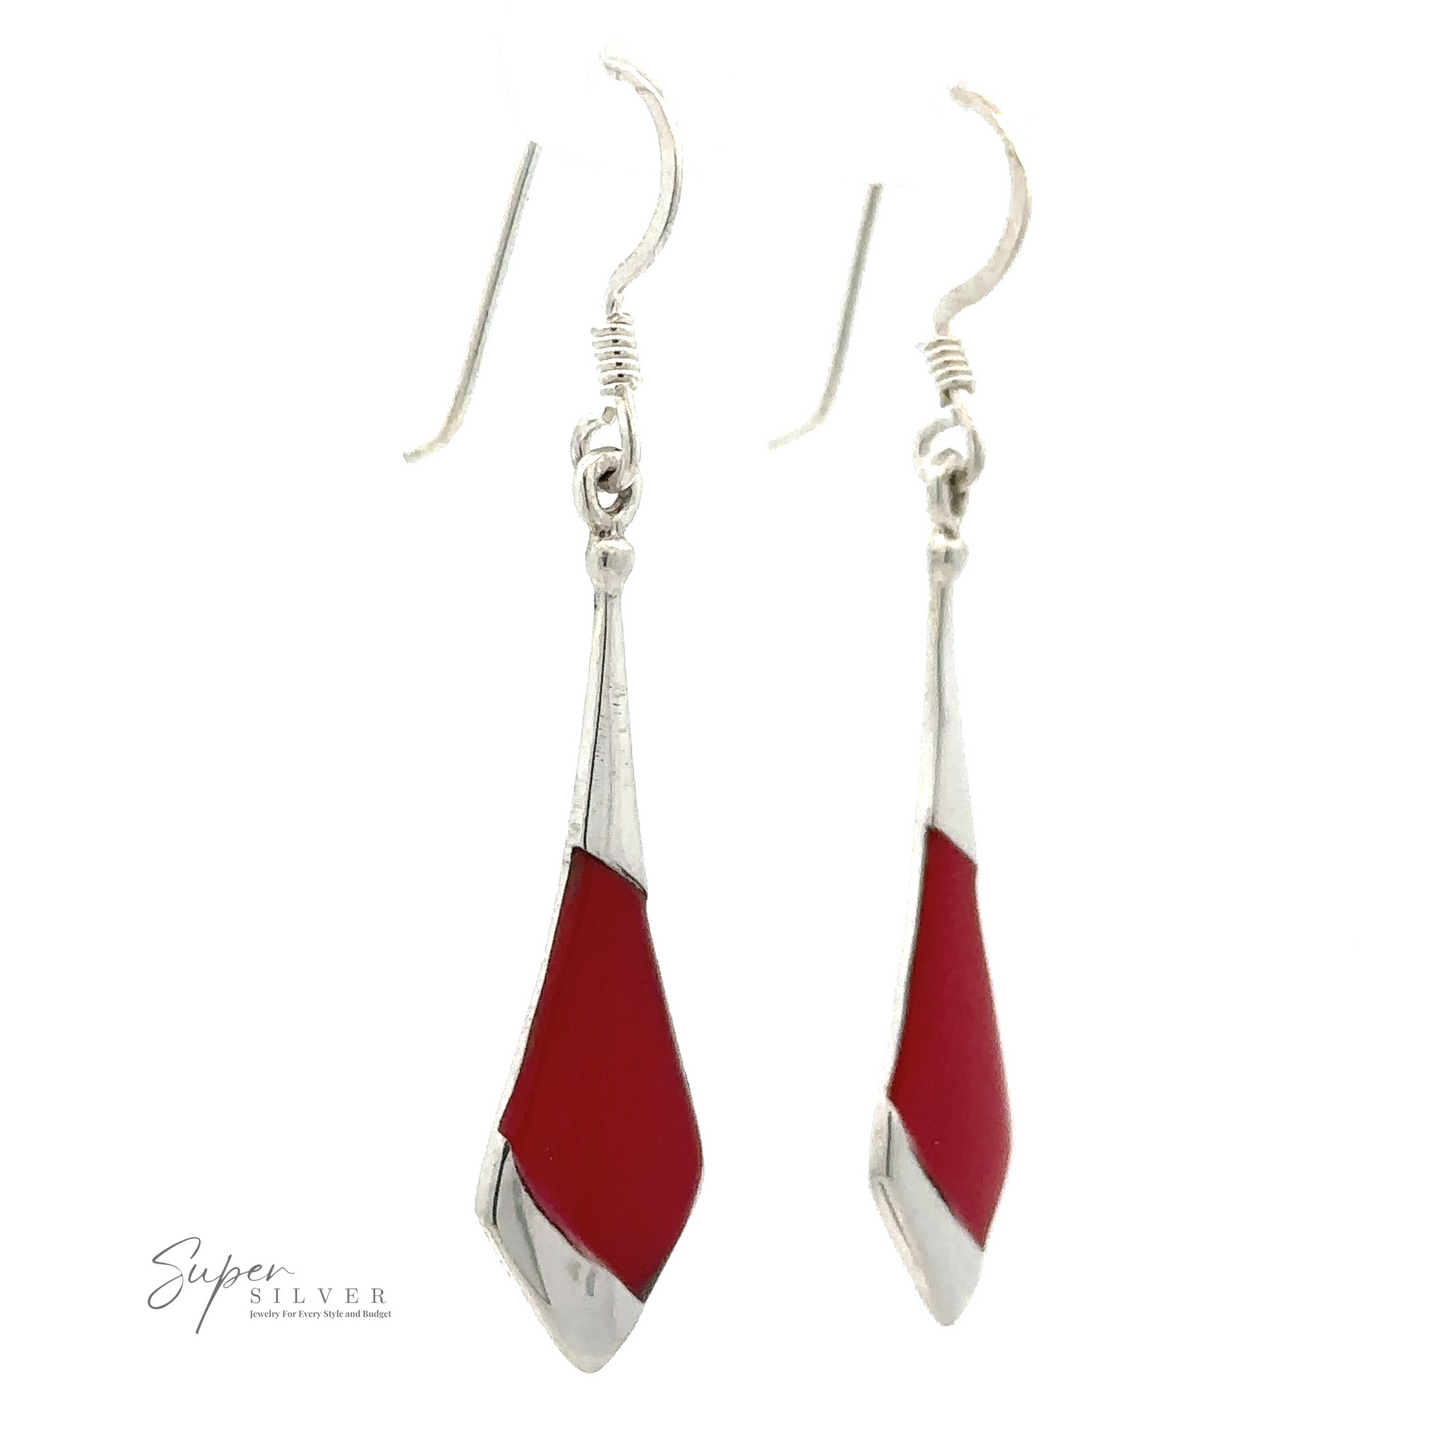 
                  
                    A pair of red and silver Inlaid Tie-Shaped Earrings with a curved design, featuring reconstituted coral accents. The earrings come with hooks for wearing, and "Super Silver" text appears in the corner.
                  
                